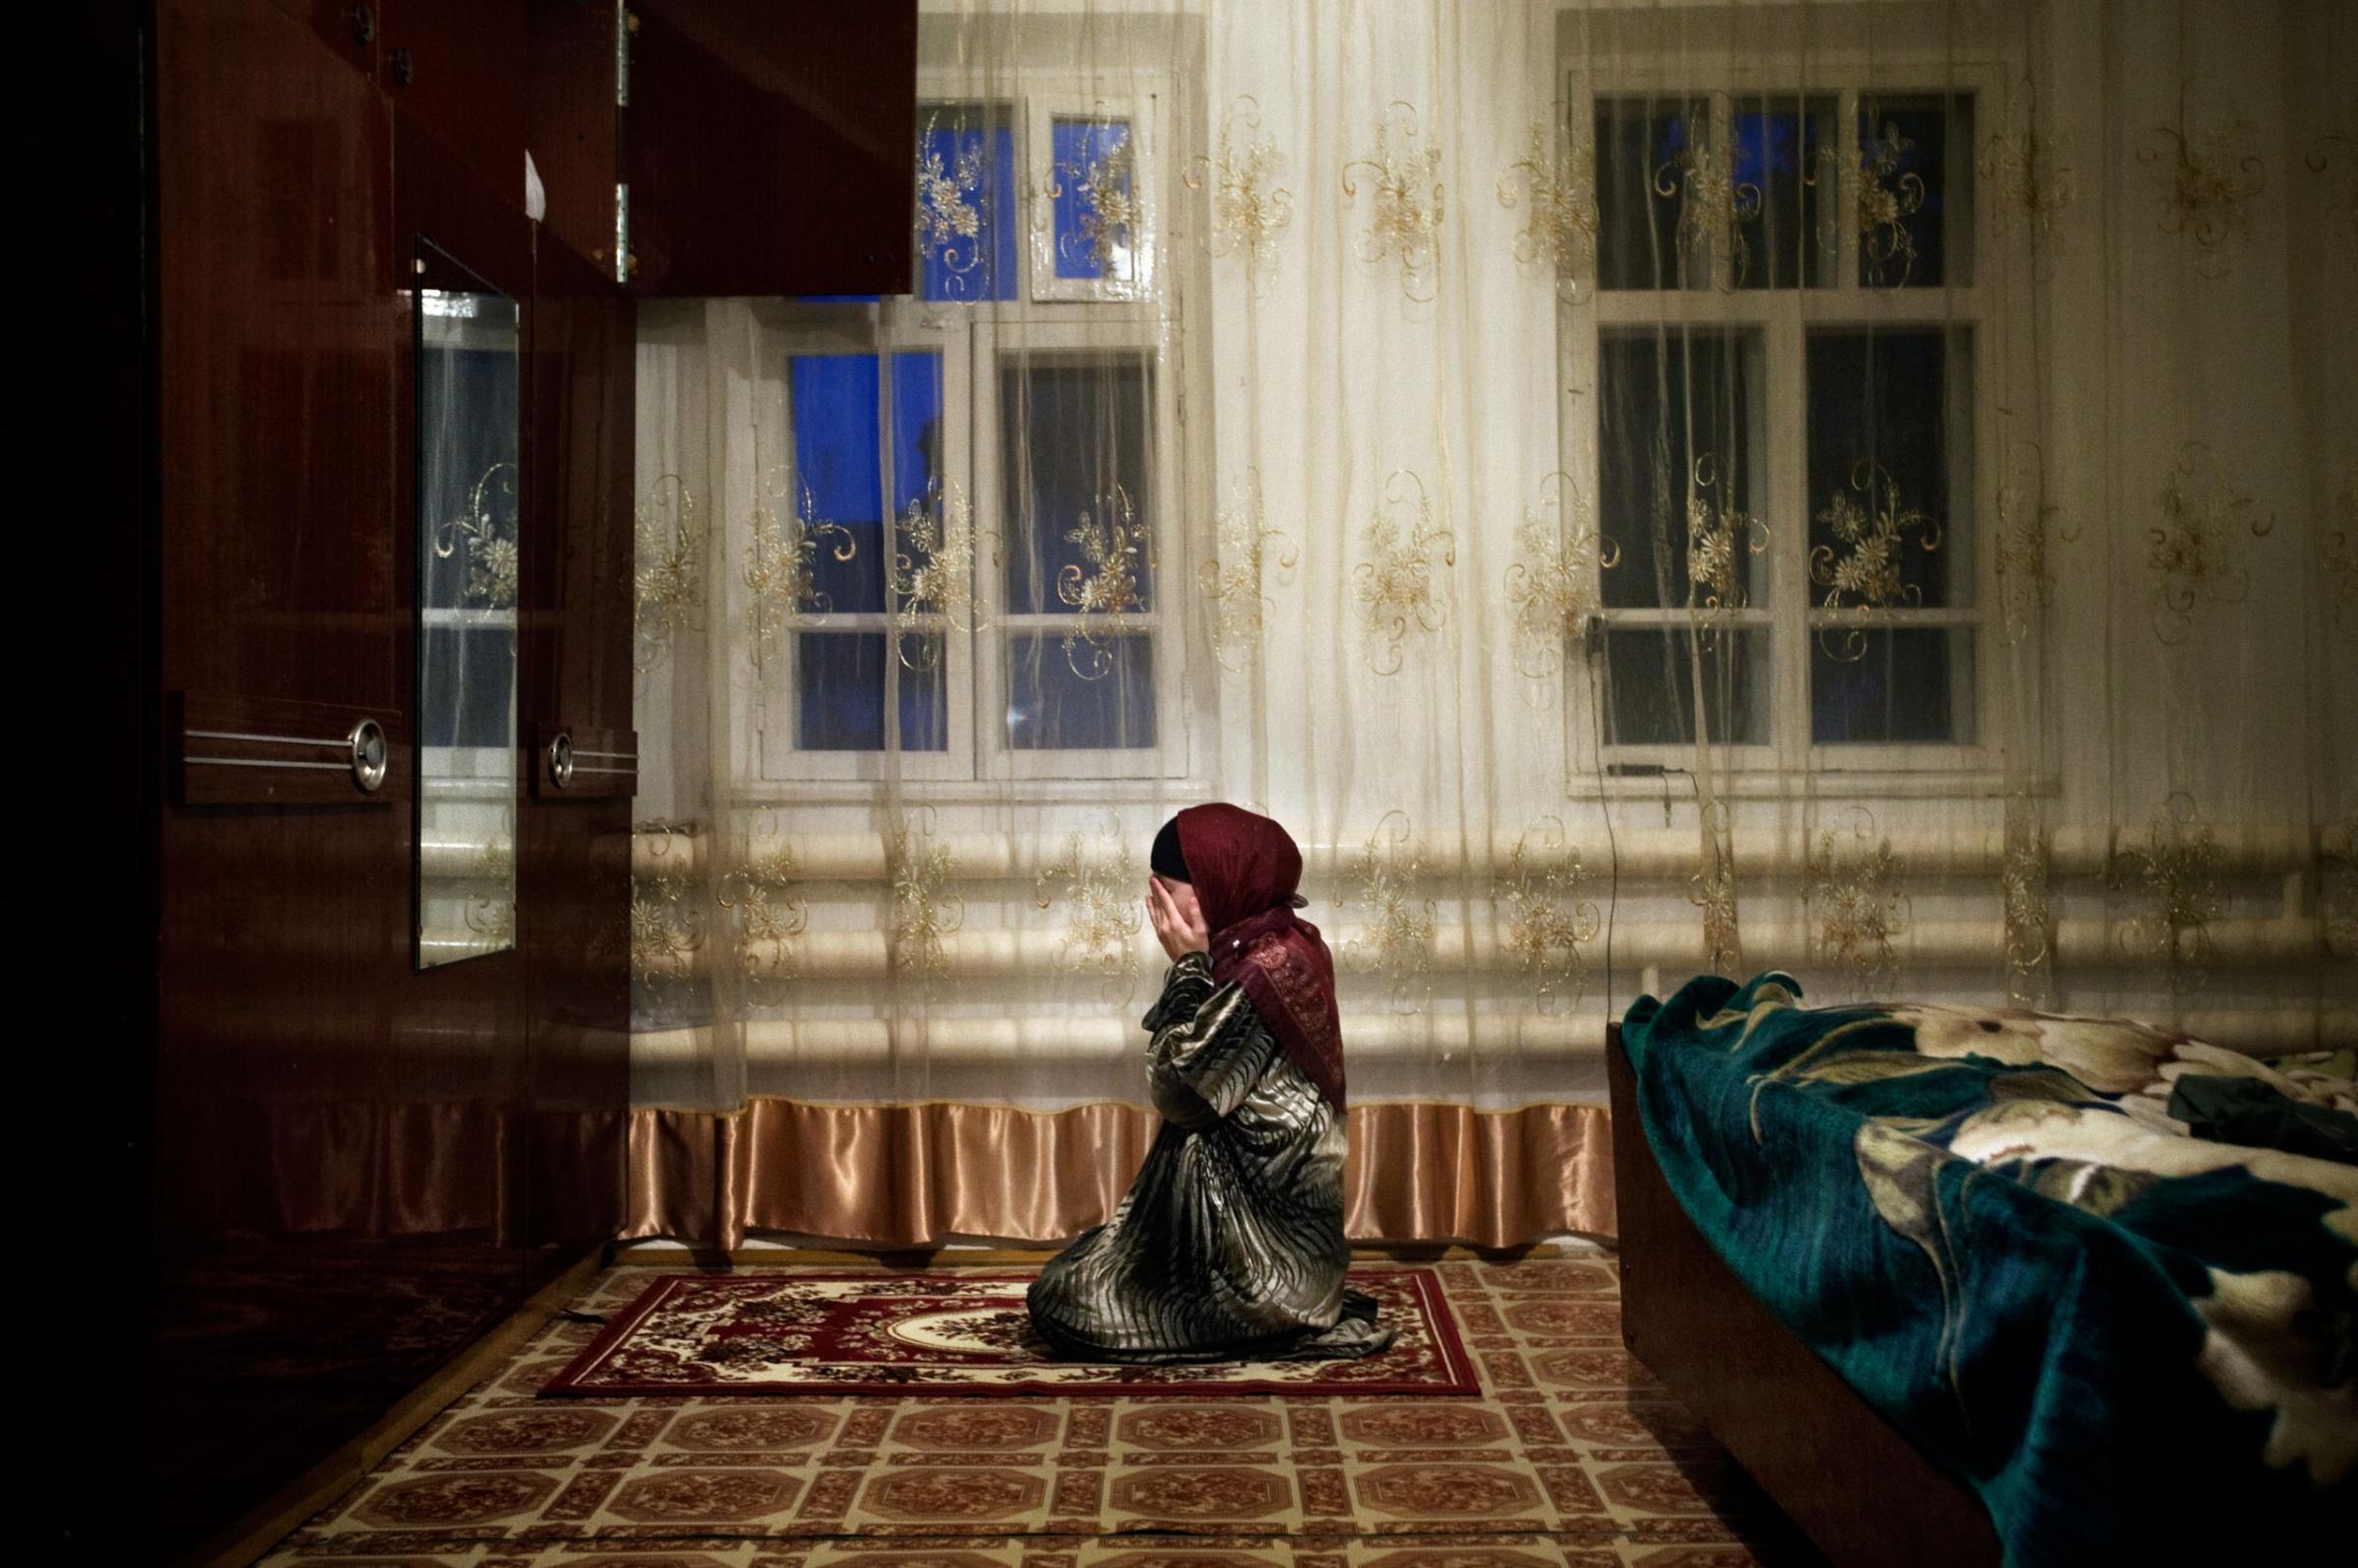 Nurjan prays in her house in Shali, Chechnya. Her brother Yusuf was killed by Chechen military and another brother, Abdul Yazid, was abducted, October, 2009.Yuri kozyrev—NOOR